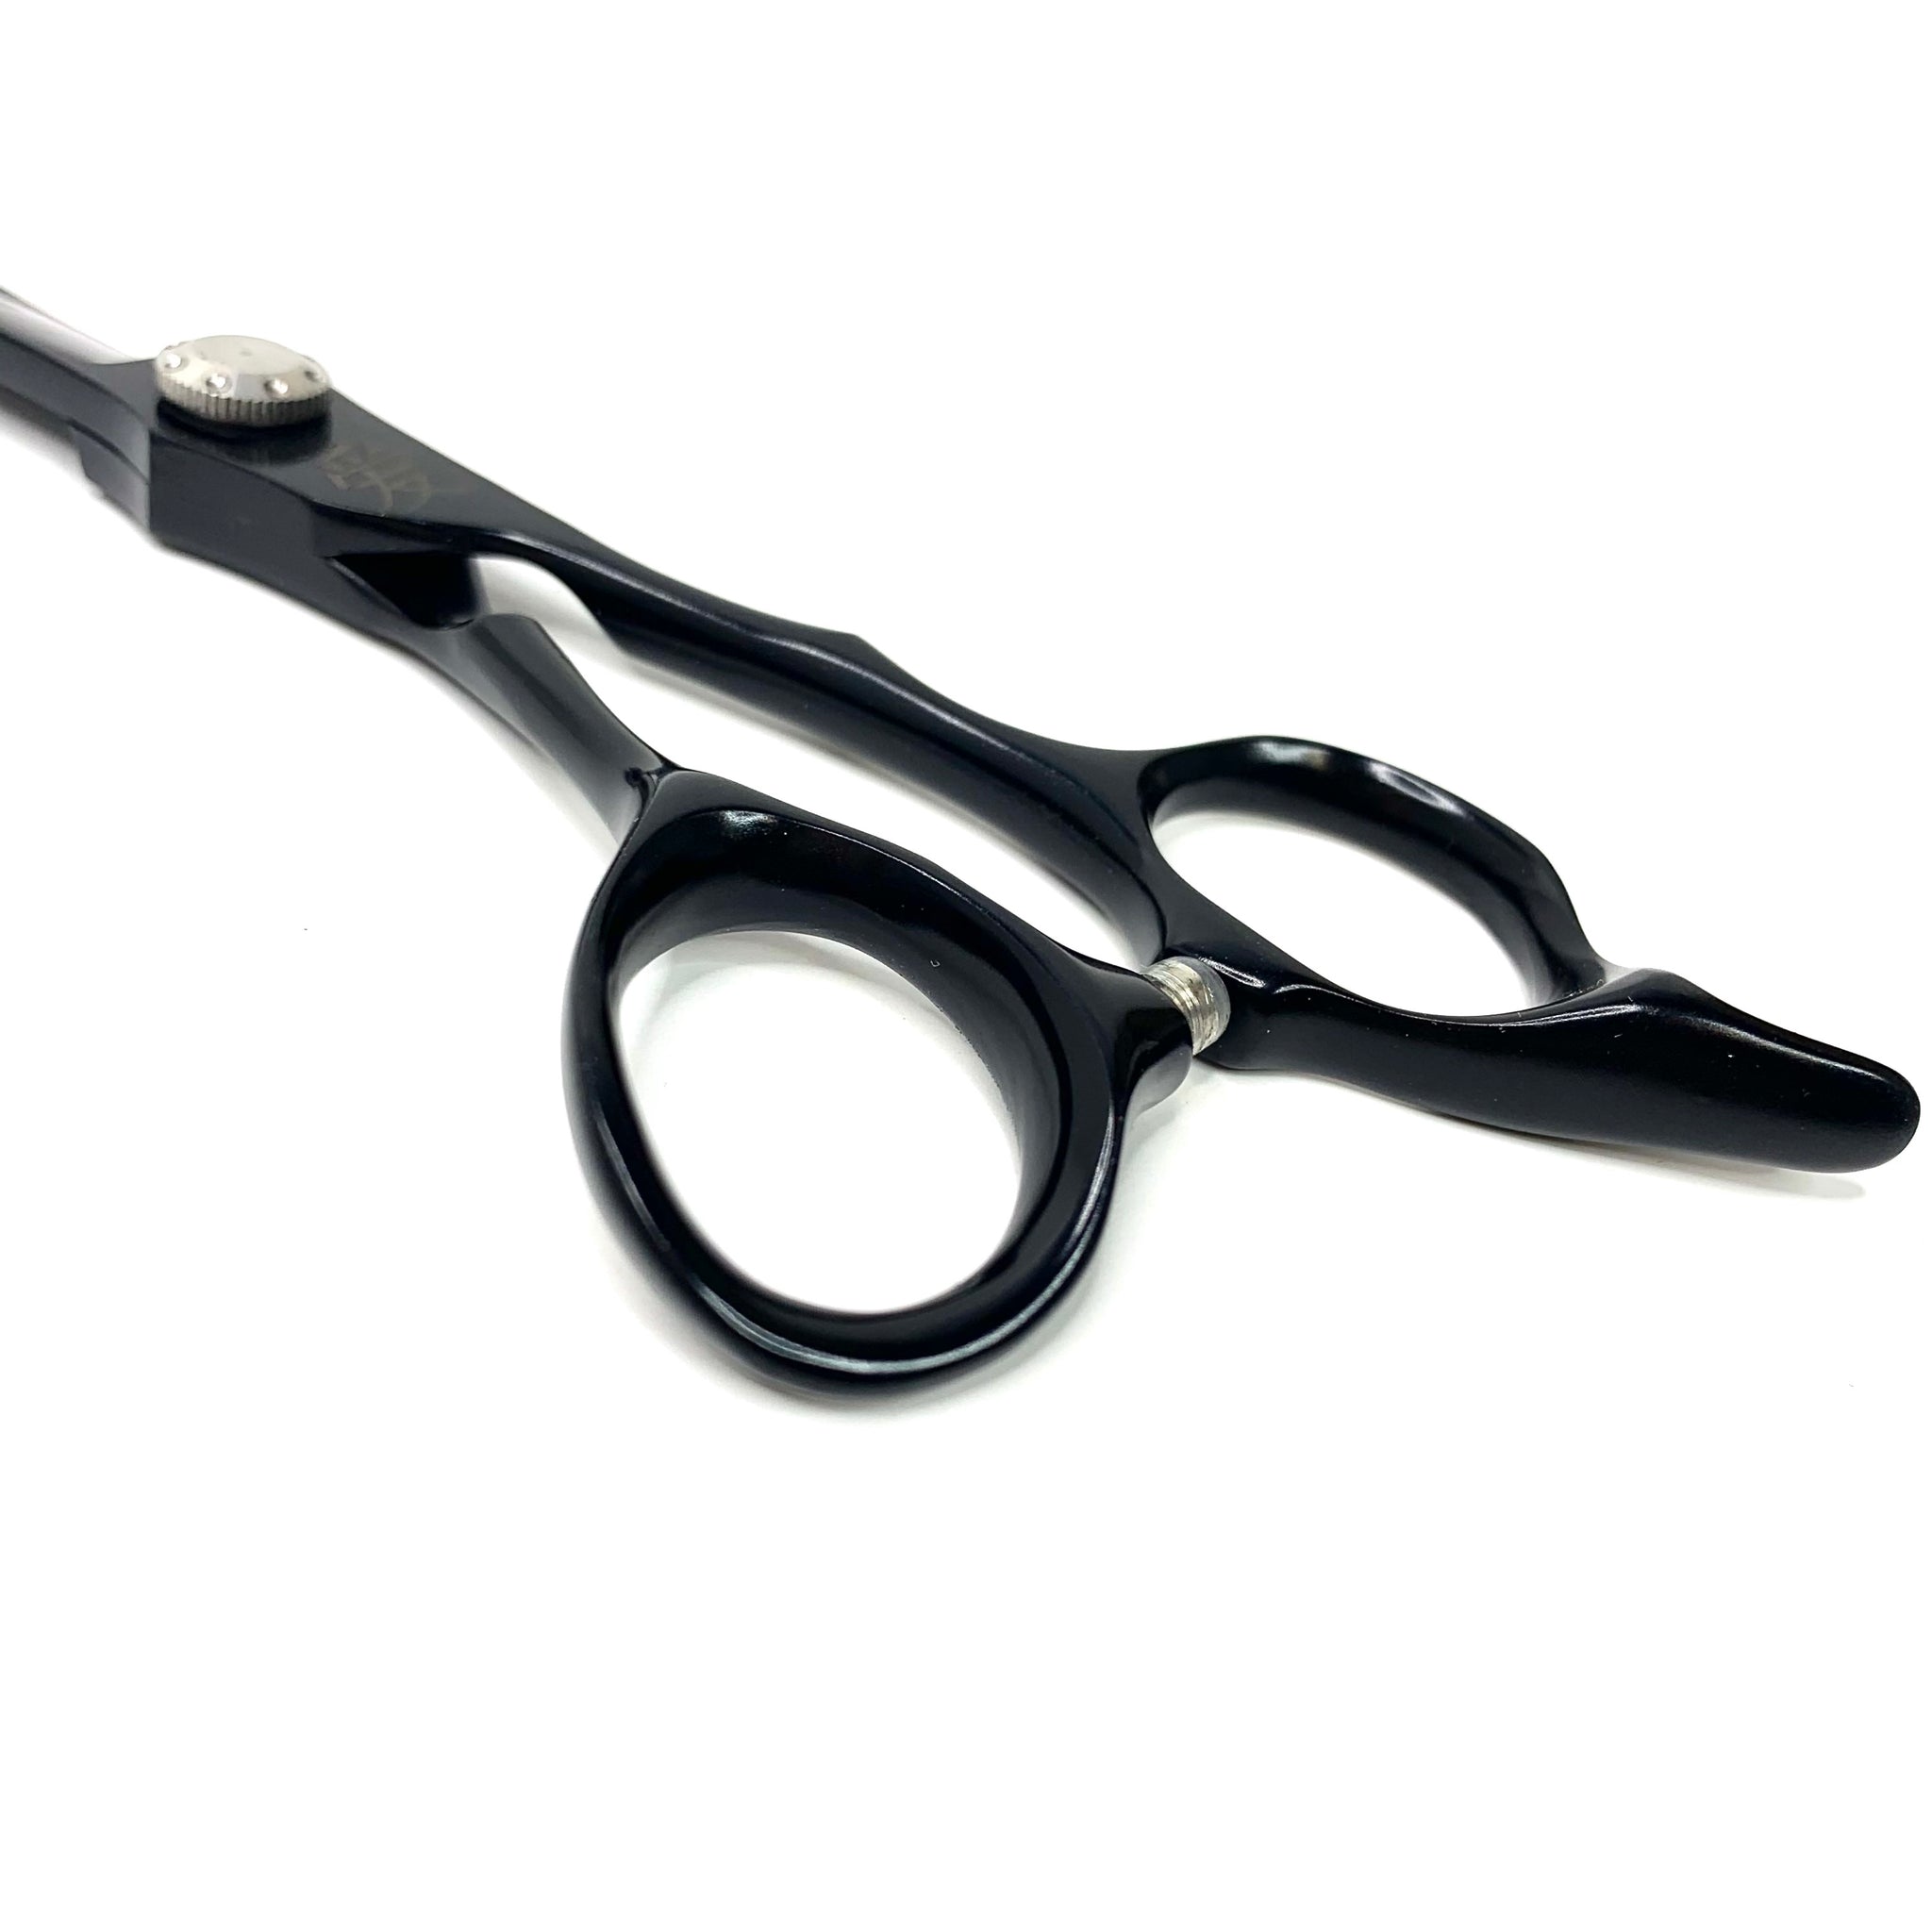 The Black Panther Nova Black Styling Japanese Shear 7 Inches